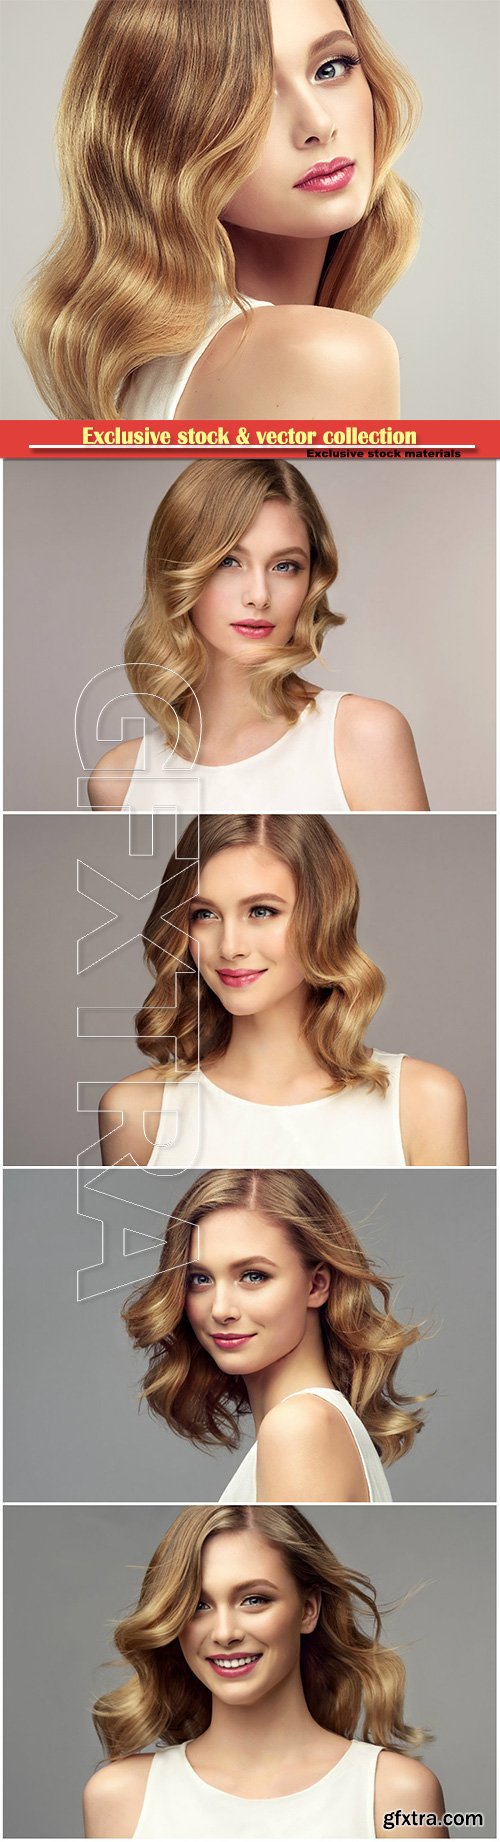 Blonde woman with curly beautiful hair on gray background